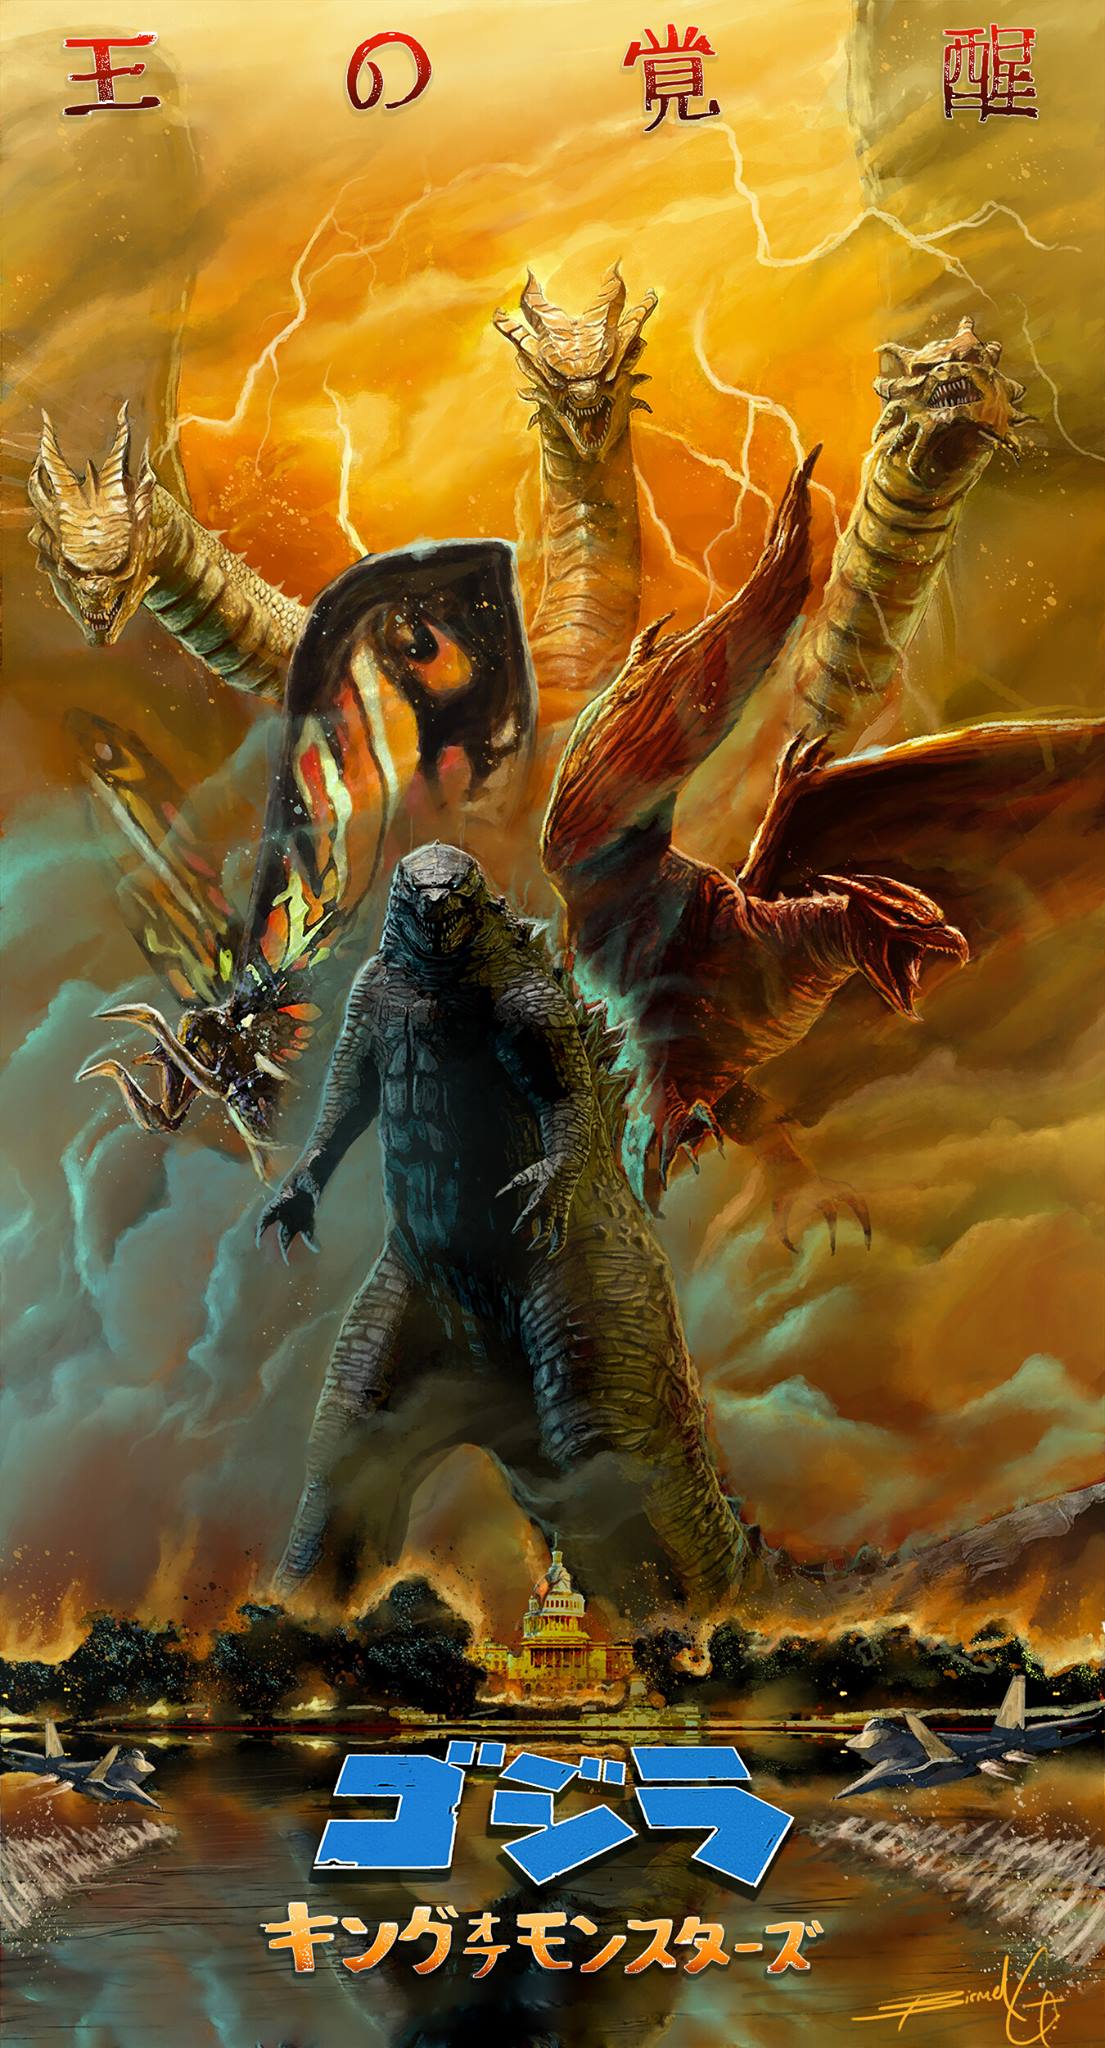 aircraft airplane bad_anatomy birmel_guerrero blue_eyes bug building butterfly city conjoined deity destruction dinosaur dragon electricity energy epic fighter_jet fire glowing god goddess godzilla godzilla_(2019) godzilla_(series) highres horns hurricane hydra insect jet king_ghidorah king_ghidorah_(2019) legendary_pictures lightning military military_vehicle monsterverse moth mothra mothra_(2019) multiple_heads no_humans pterodactyl red_eyes reflection rodan rodan_(2019) spikes storm tail text_focus toho_(film_company) tornado trees united_states_capitol washington_d.c. water wings